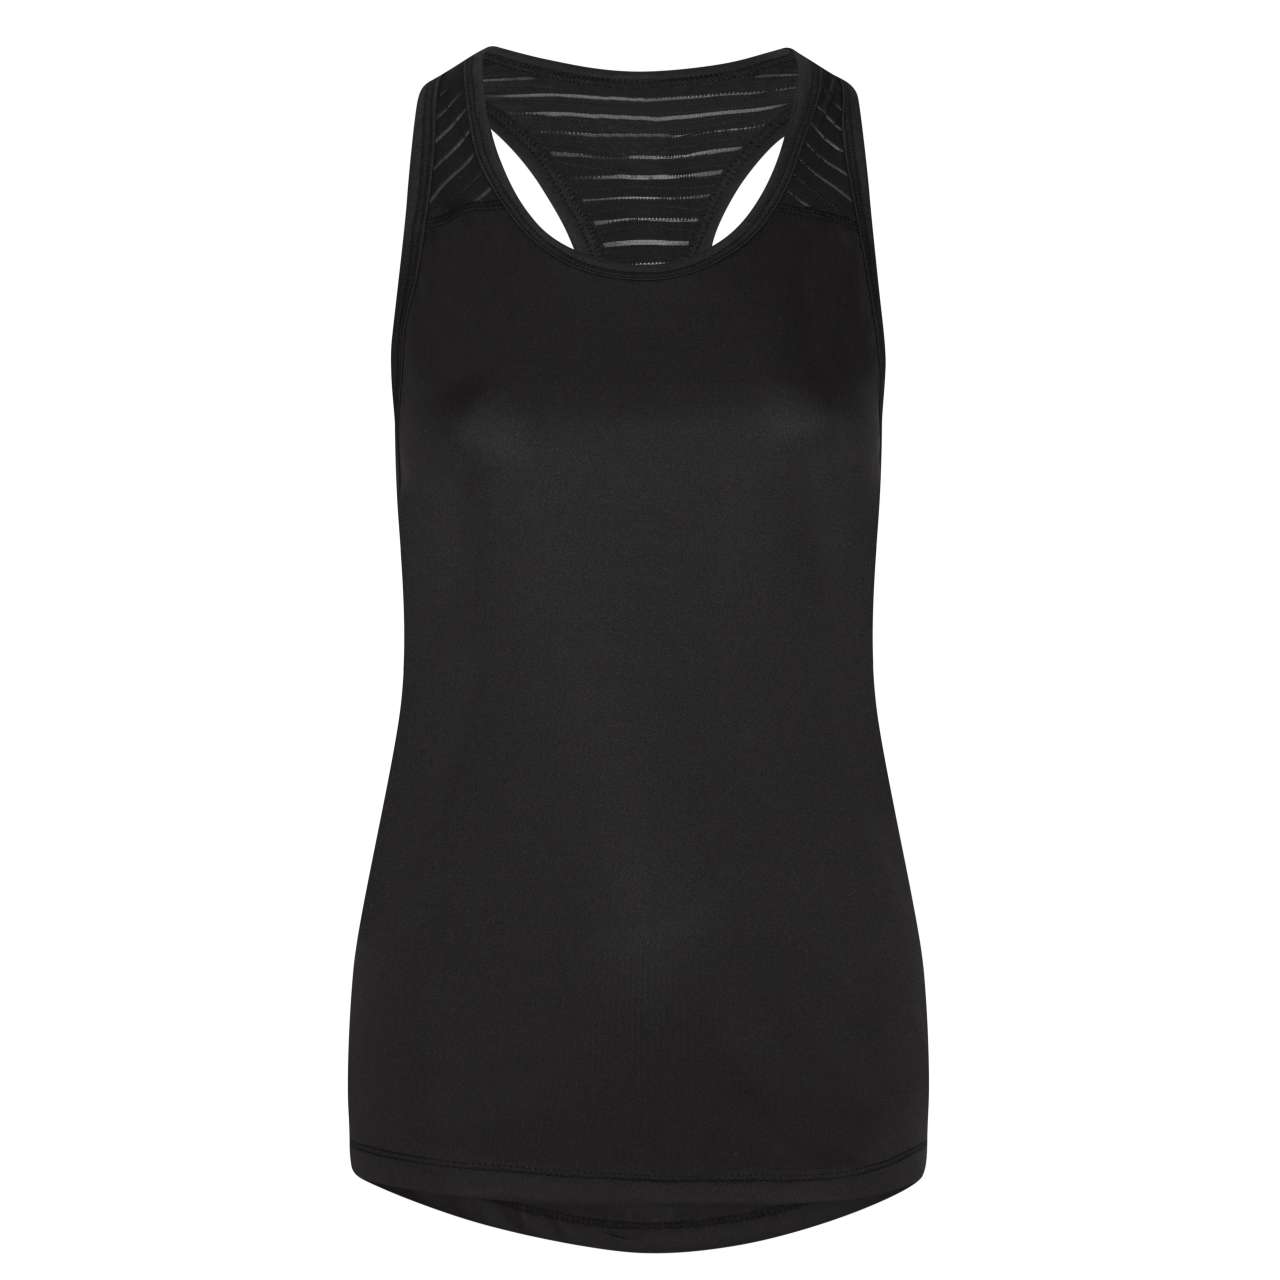 Promo  WOMEN'S COOL SMOOTH WORKOUT VEST